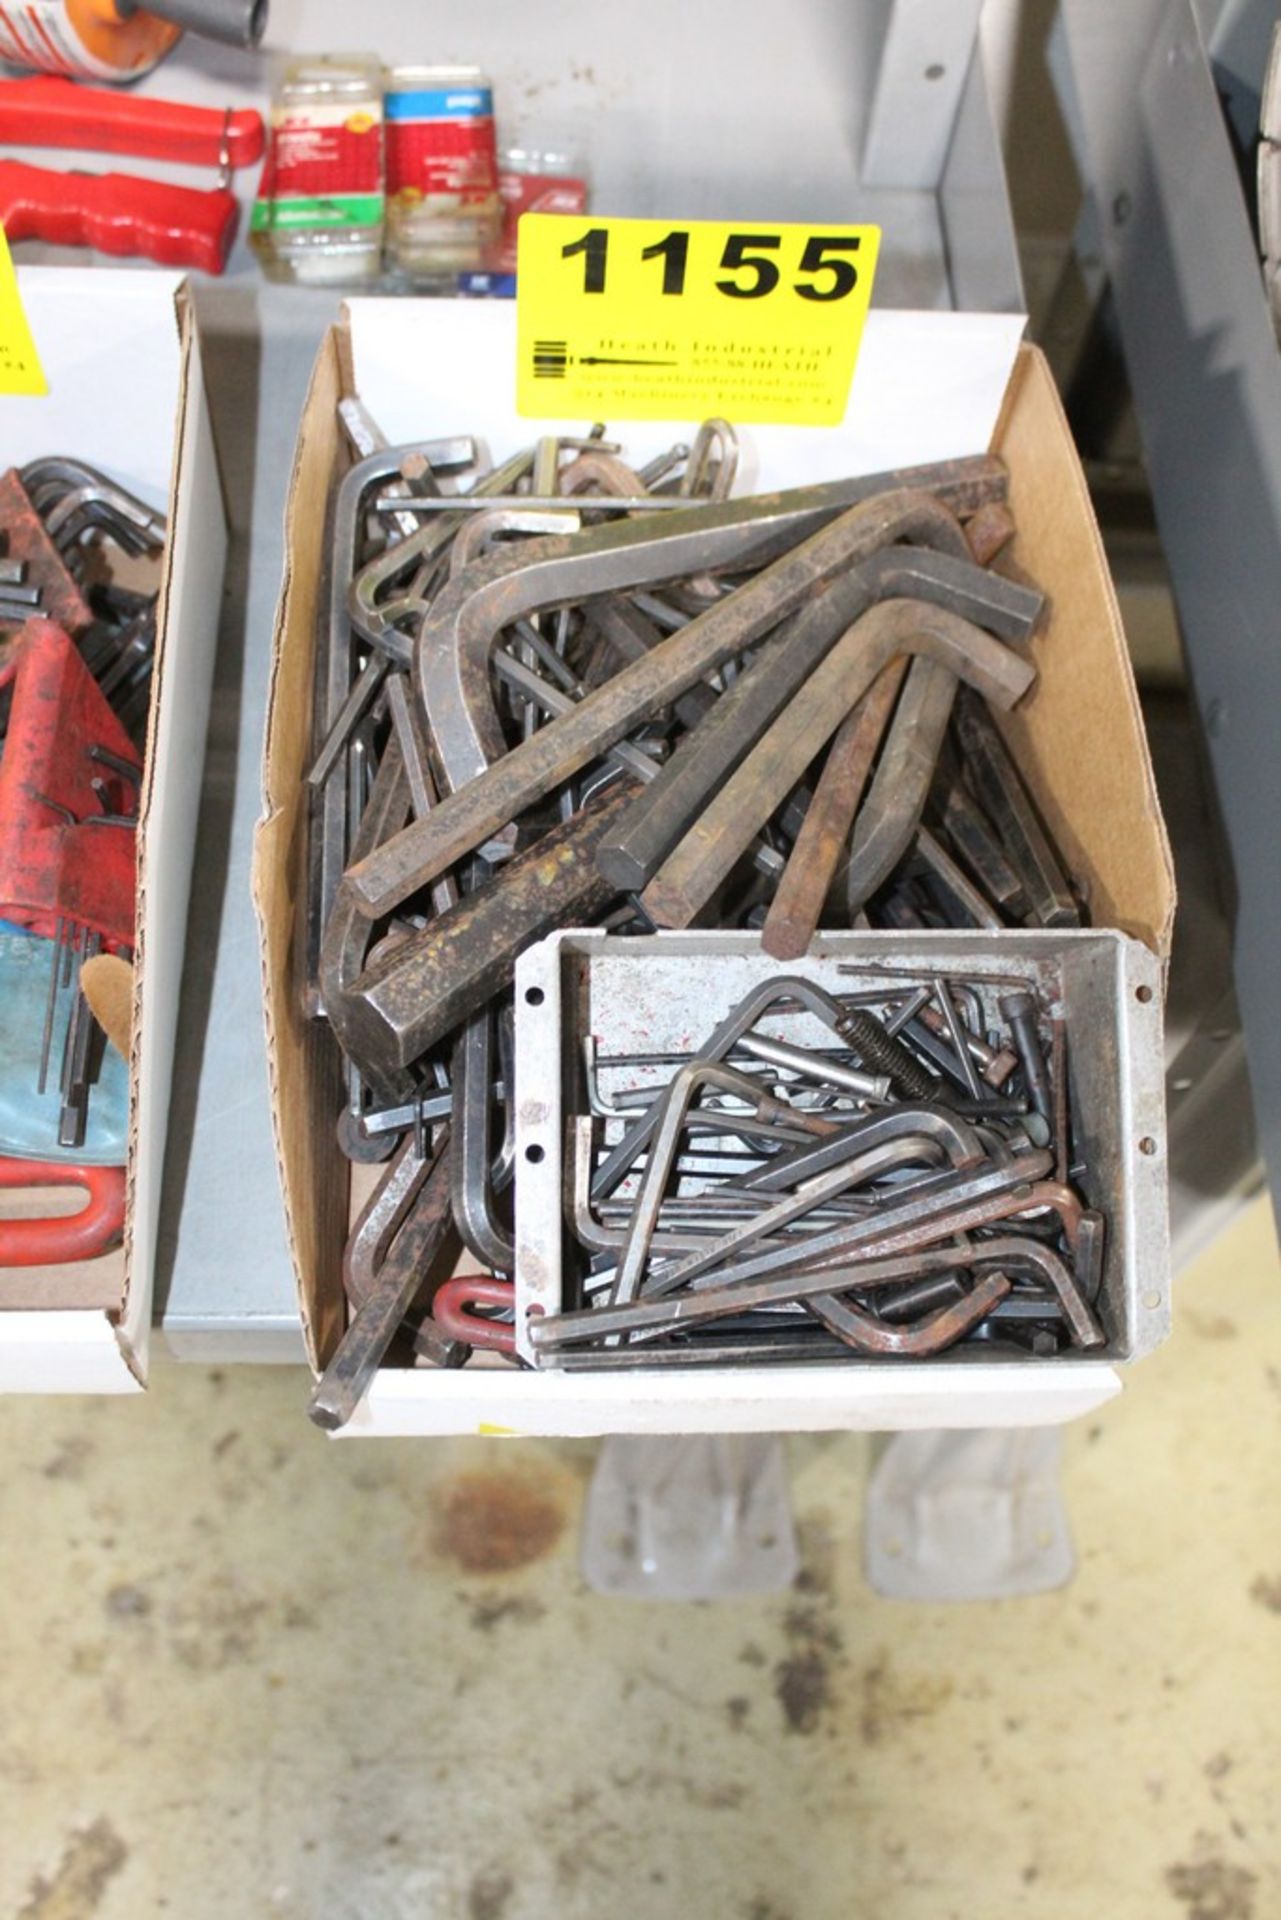 ASSORTED HEX KEYS IN BOX